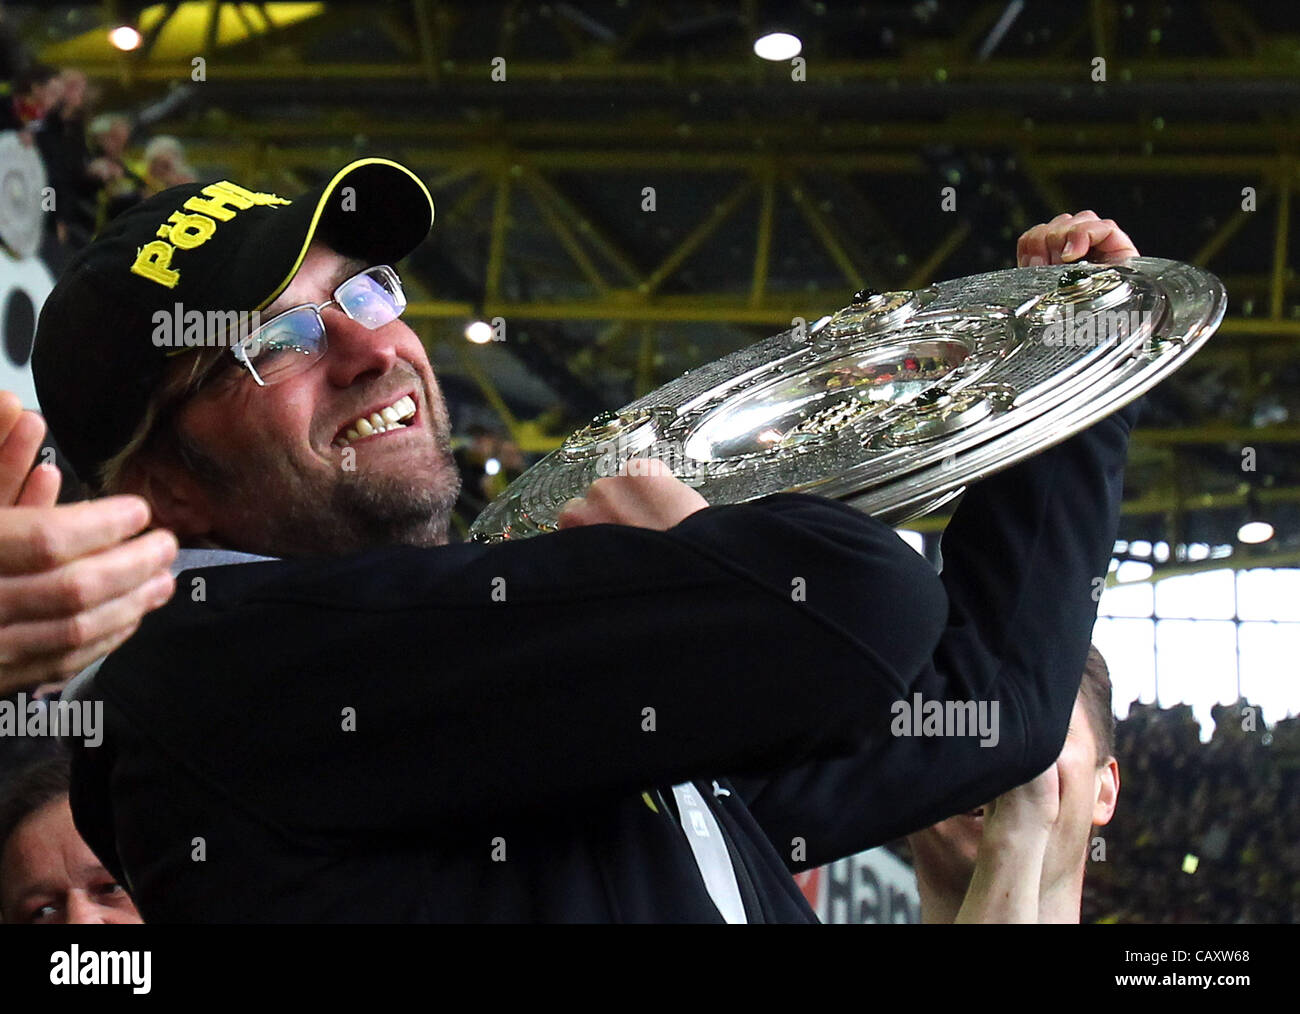 DORTMUND, GERMANY - MAY 05:  Juergen Klopp, head coach of Dortmund lifts the trophy after winning the german championship after the Bundesliga match between Borussia Dortmund and SC Freiburg at Signal Iduna Park on May 5, 2012 in Dortmund, Germany. Stock Photo